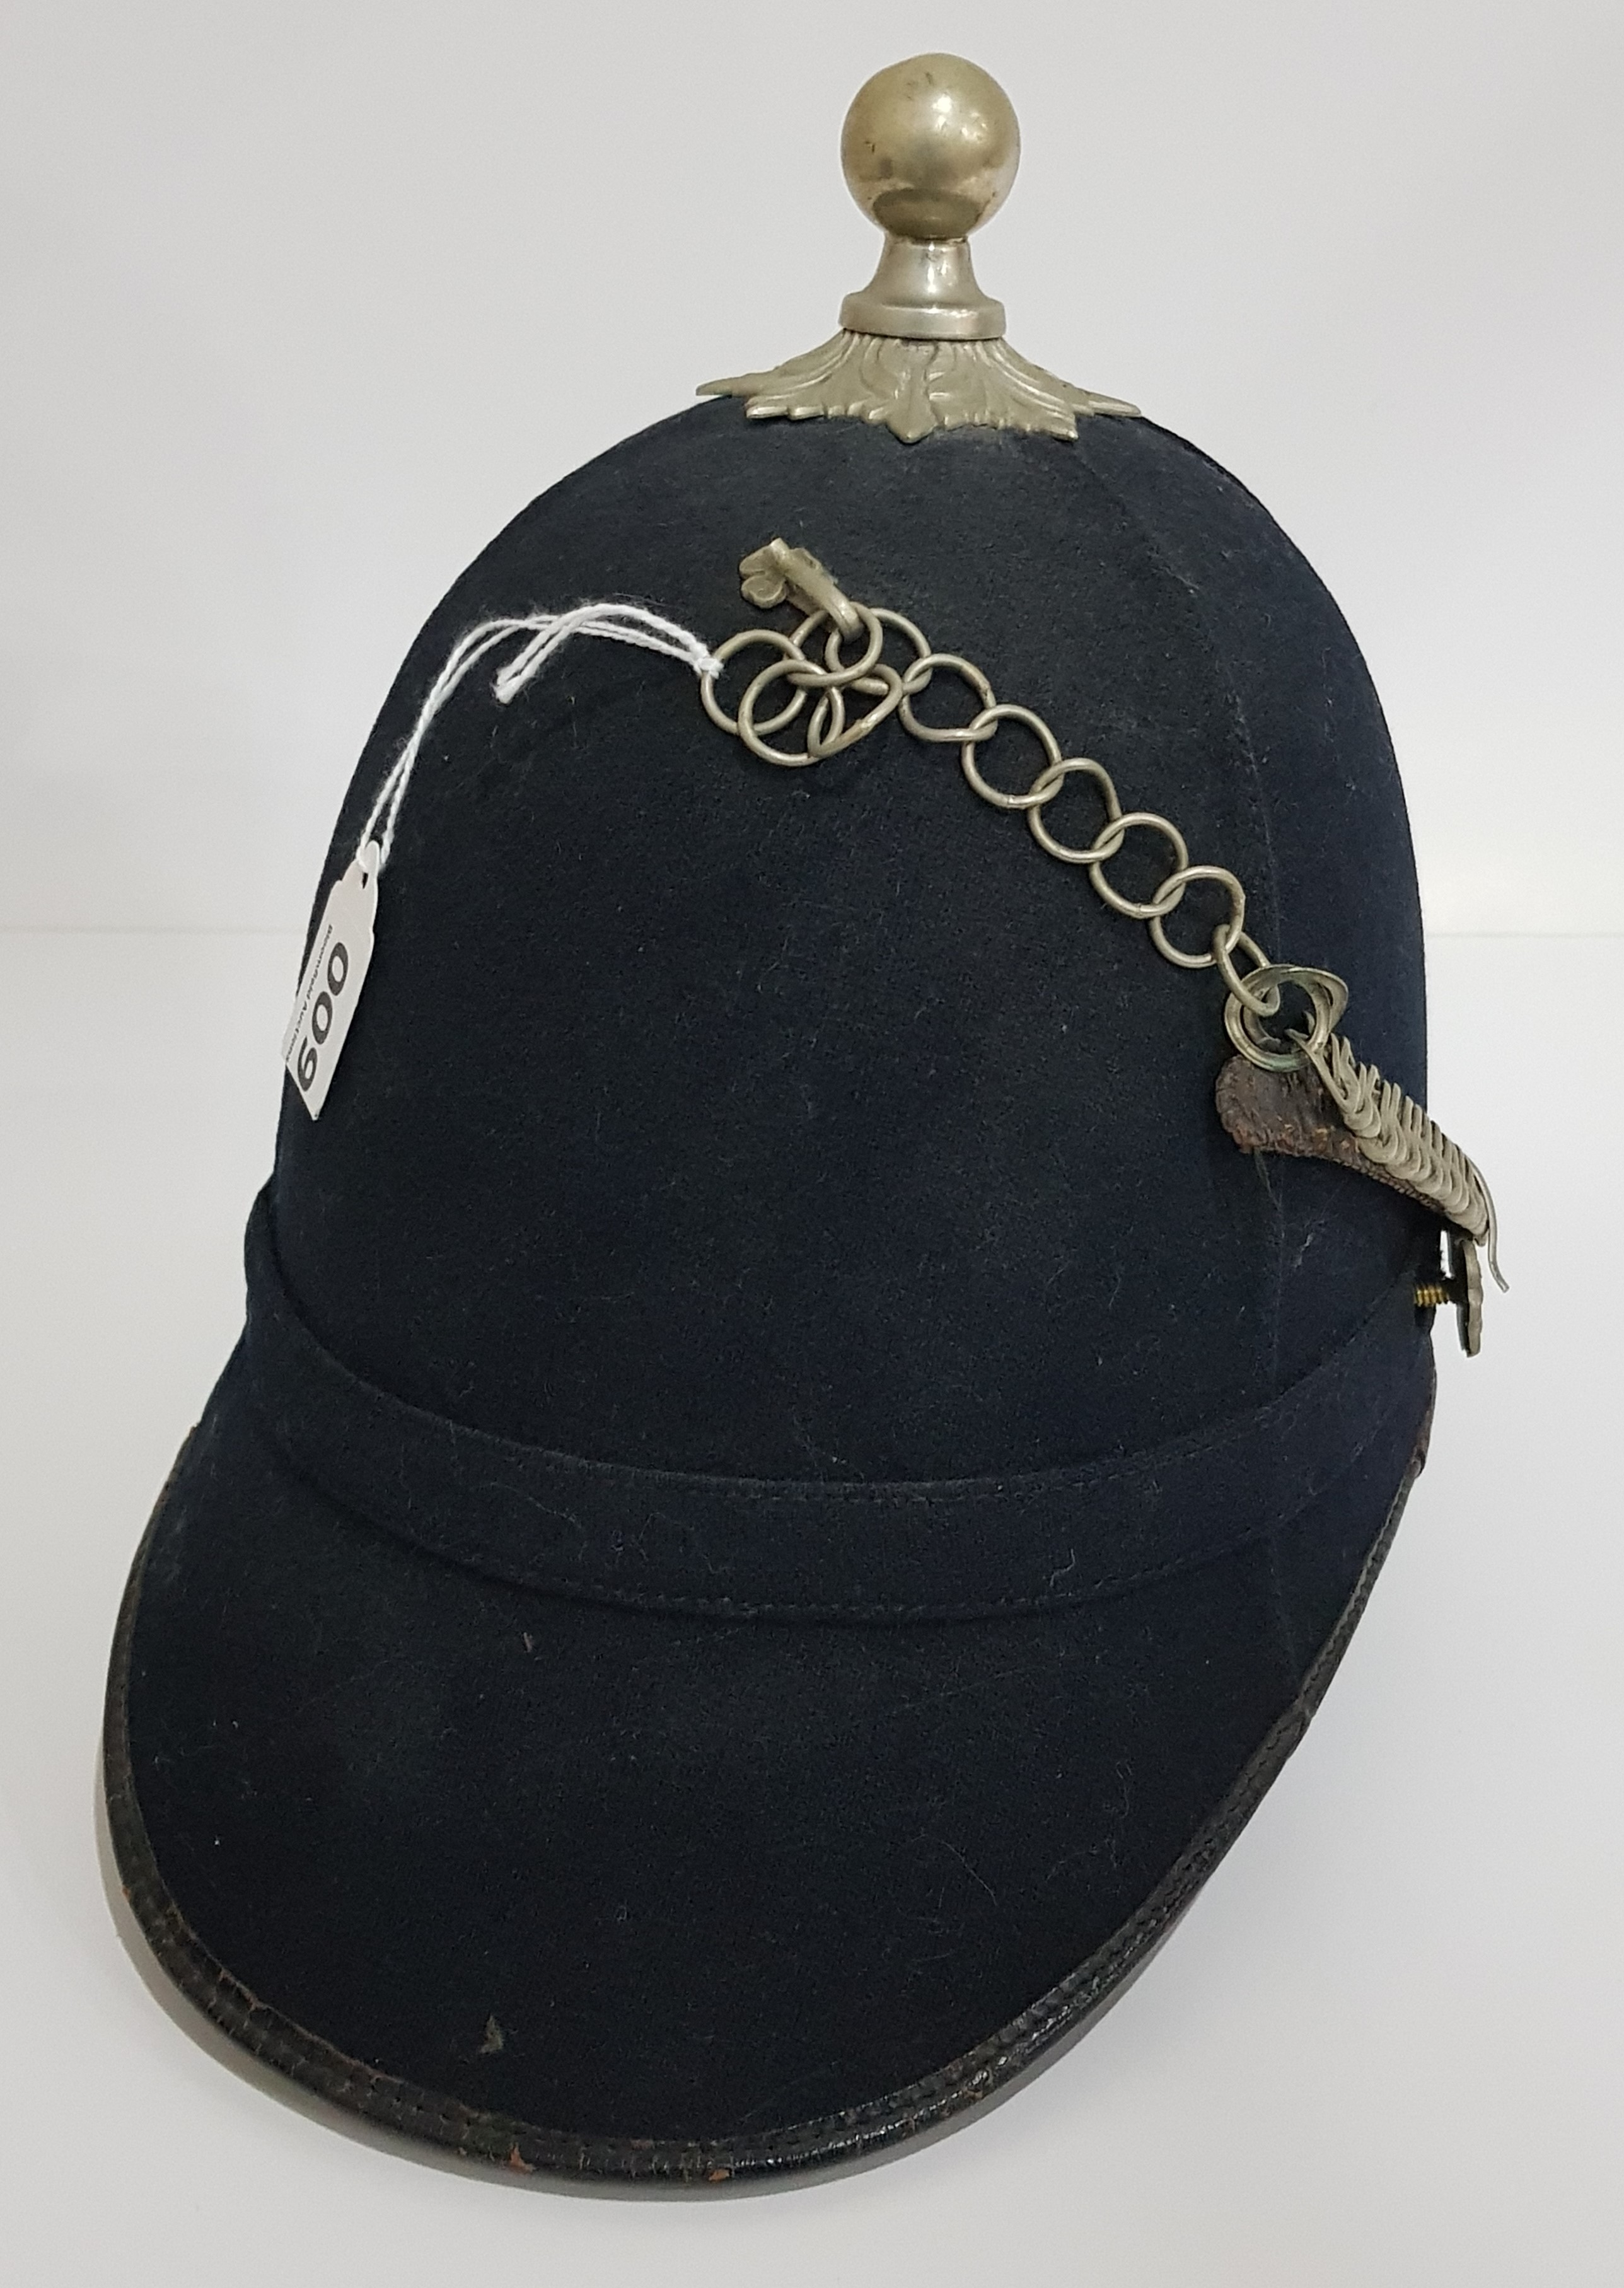 RARE GARDA SIOCHANA POLICE HELMET (EARLY ISSUE) - Further details on previous owner. - Image 2 of 3